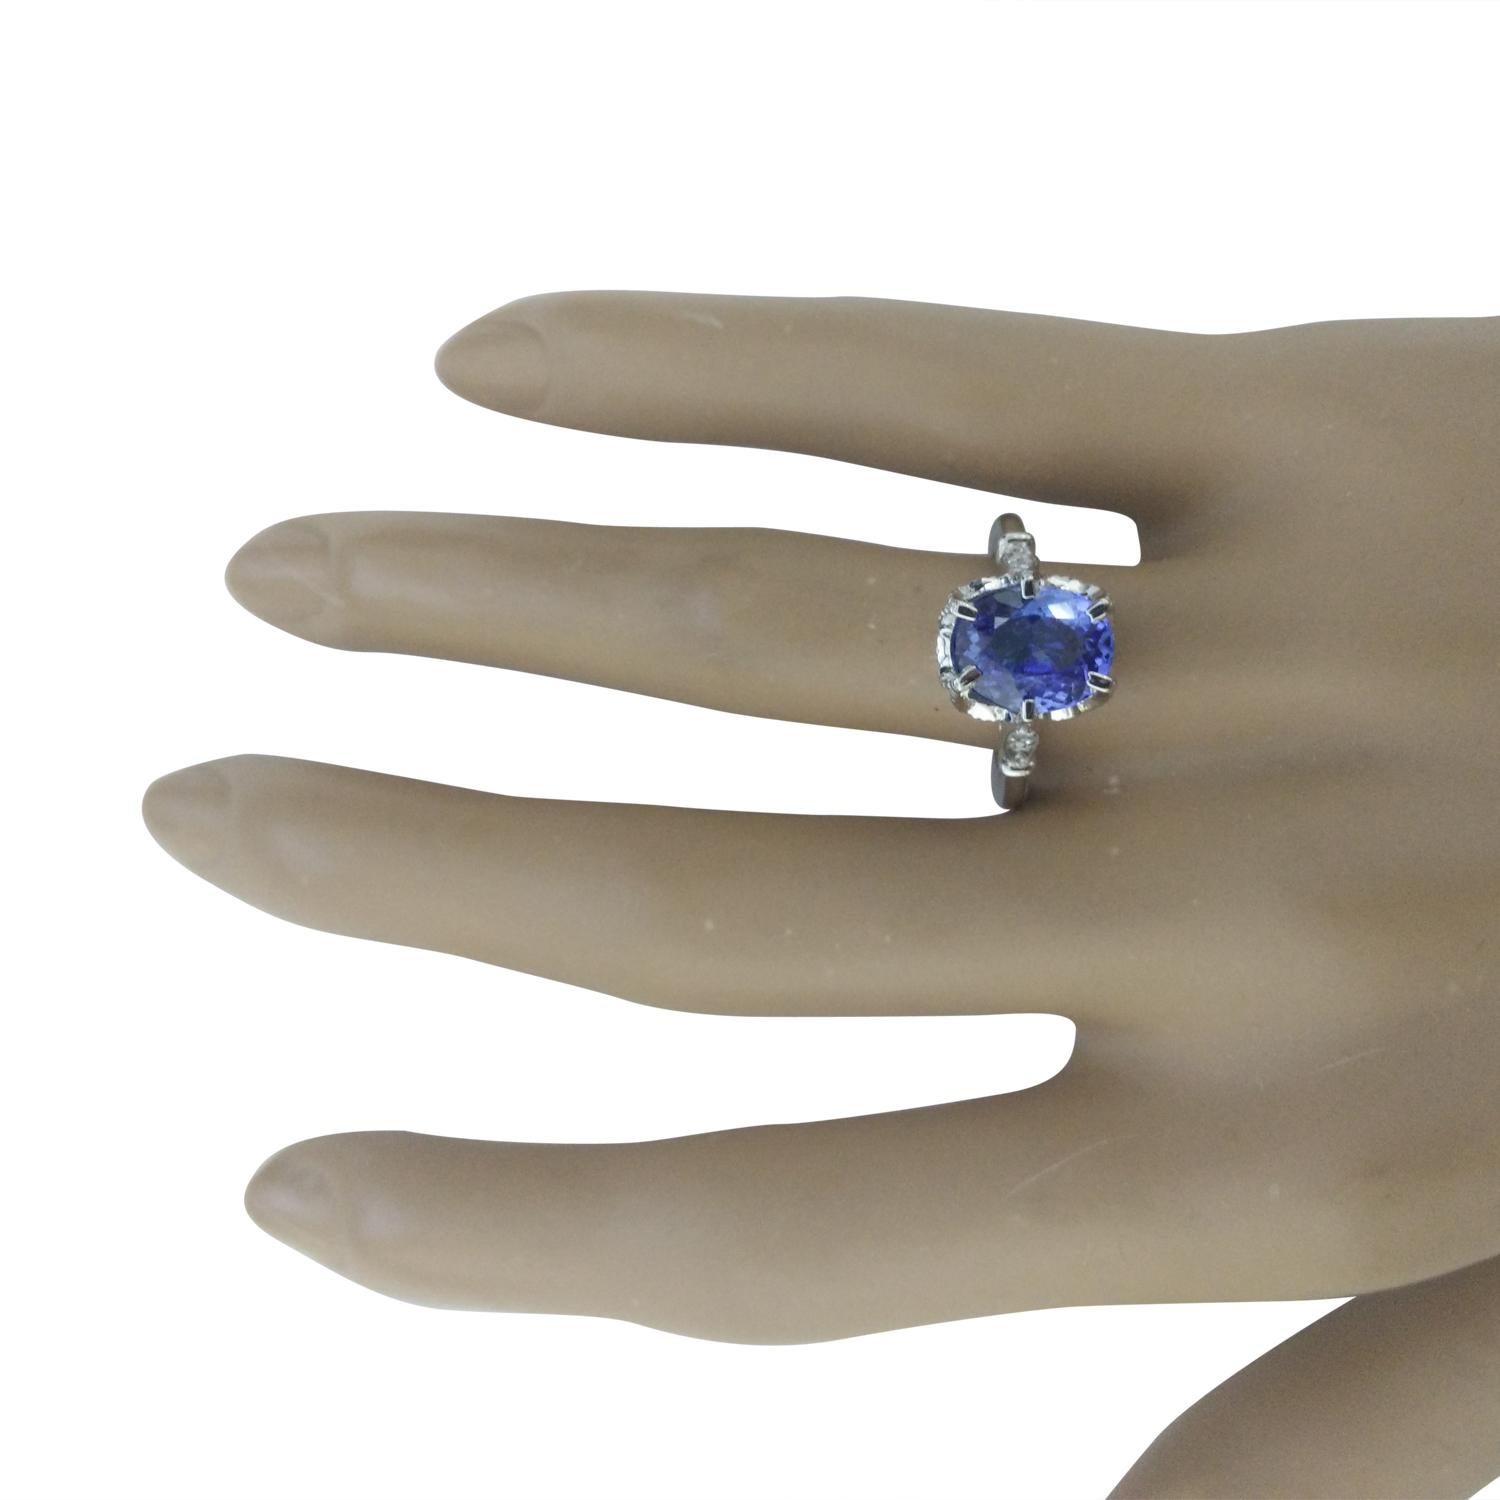 2.69 Carat Natural Tanzanite 14 Karat Solid White Gold Diamond Ring
Stamped: 14K
Total Ring Weight: 2.5 Grams 
Tanzanite Weight: 2.54 Carat (10.00x8.00 Millimeters)  
Diamond Weight: 0.15 Carat (F-G Color, VS2-SI1 Clarity)
Quantity: 4
Face Measures: